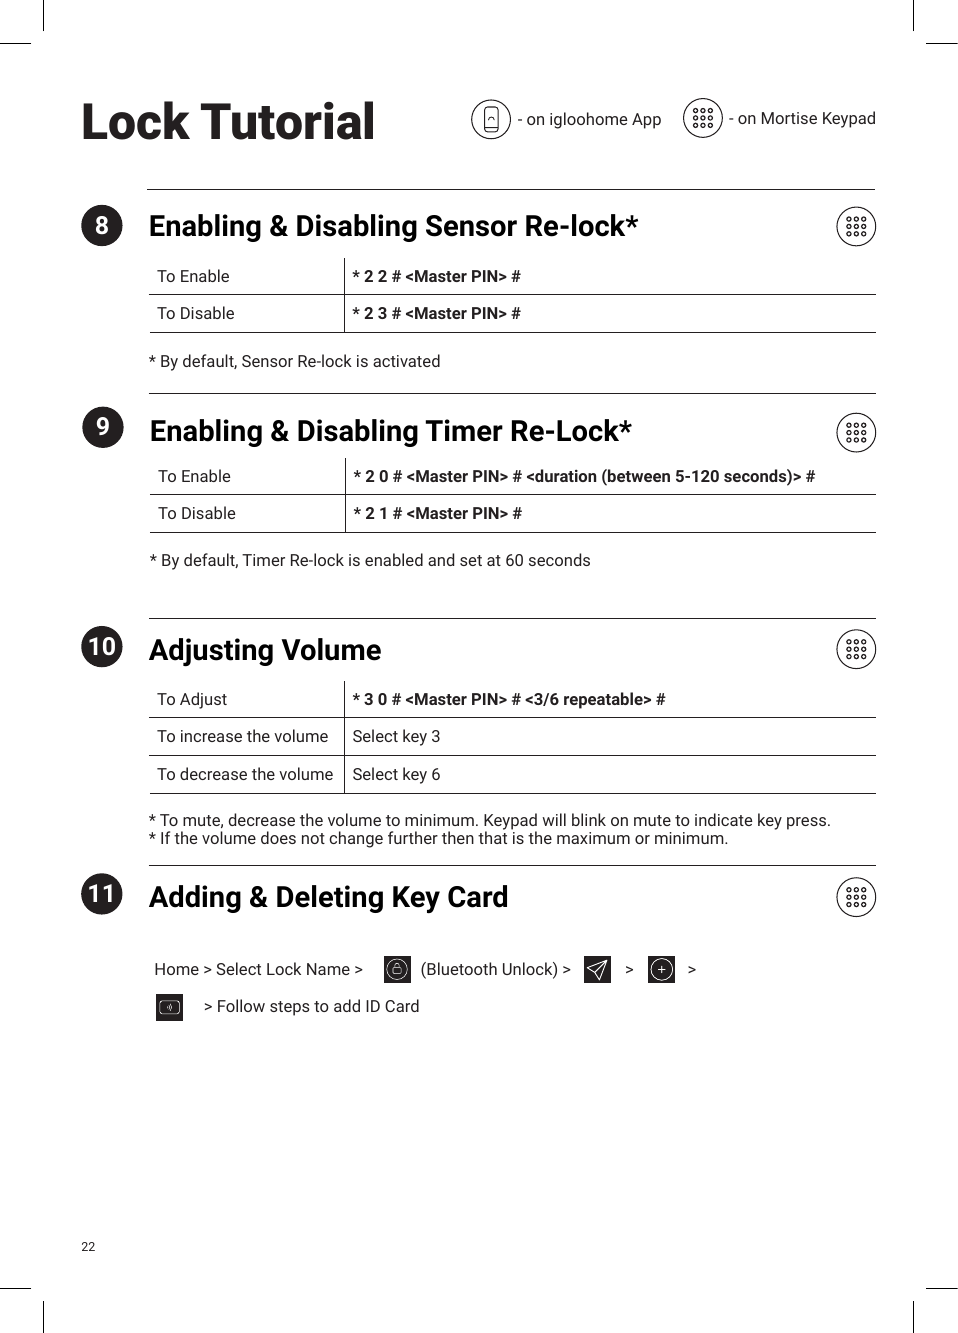 Enabling &amp; Disabling Sensor Re-lock*8To Enable * 2 2 # &lt;Master PIN&gt; # To Disable * 2 3 # &lt;Master PIN&gt; #* By default, Sensor Re-lock is activated10* To mute, decrease the volume to minimum. Keypad will blink on mute to indicate key press.* If the volume does not change further then that is the maximum or minimum.Adjusting VolumeTo Adjust * 3 0 # &lt;Master PIN&gt; # &lt;3/6 repeatable&gt; #To increase the volume Select key 3To decrease the volume Select key 611 Adding &amp; Deleting Key Card9* By default, Timer Re-lock is enabled and set at 60 secondsEnabling &amp; Disabling Timer Re-Lock*To Enable * 2 0 # &lt;Master PIN&gt; # &lt;duration (between 5-120 seconds)&gt; #To Disable * 2 1 # &lt;Master PIN&gt; #Lock Tutorial - on igloohome App - on Mortise Keypad22Home &gt; Select Lock Name &gt;            (Bluetooth Unlock) &gt;       &gt;    &gt;            &gt; Follow steps to add ID Card  